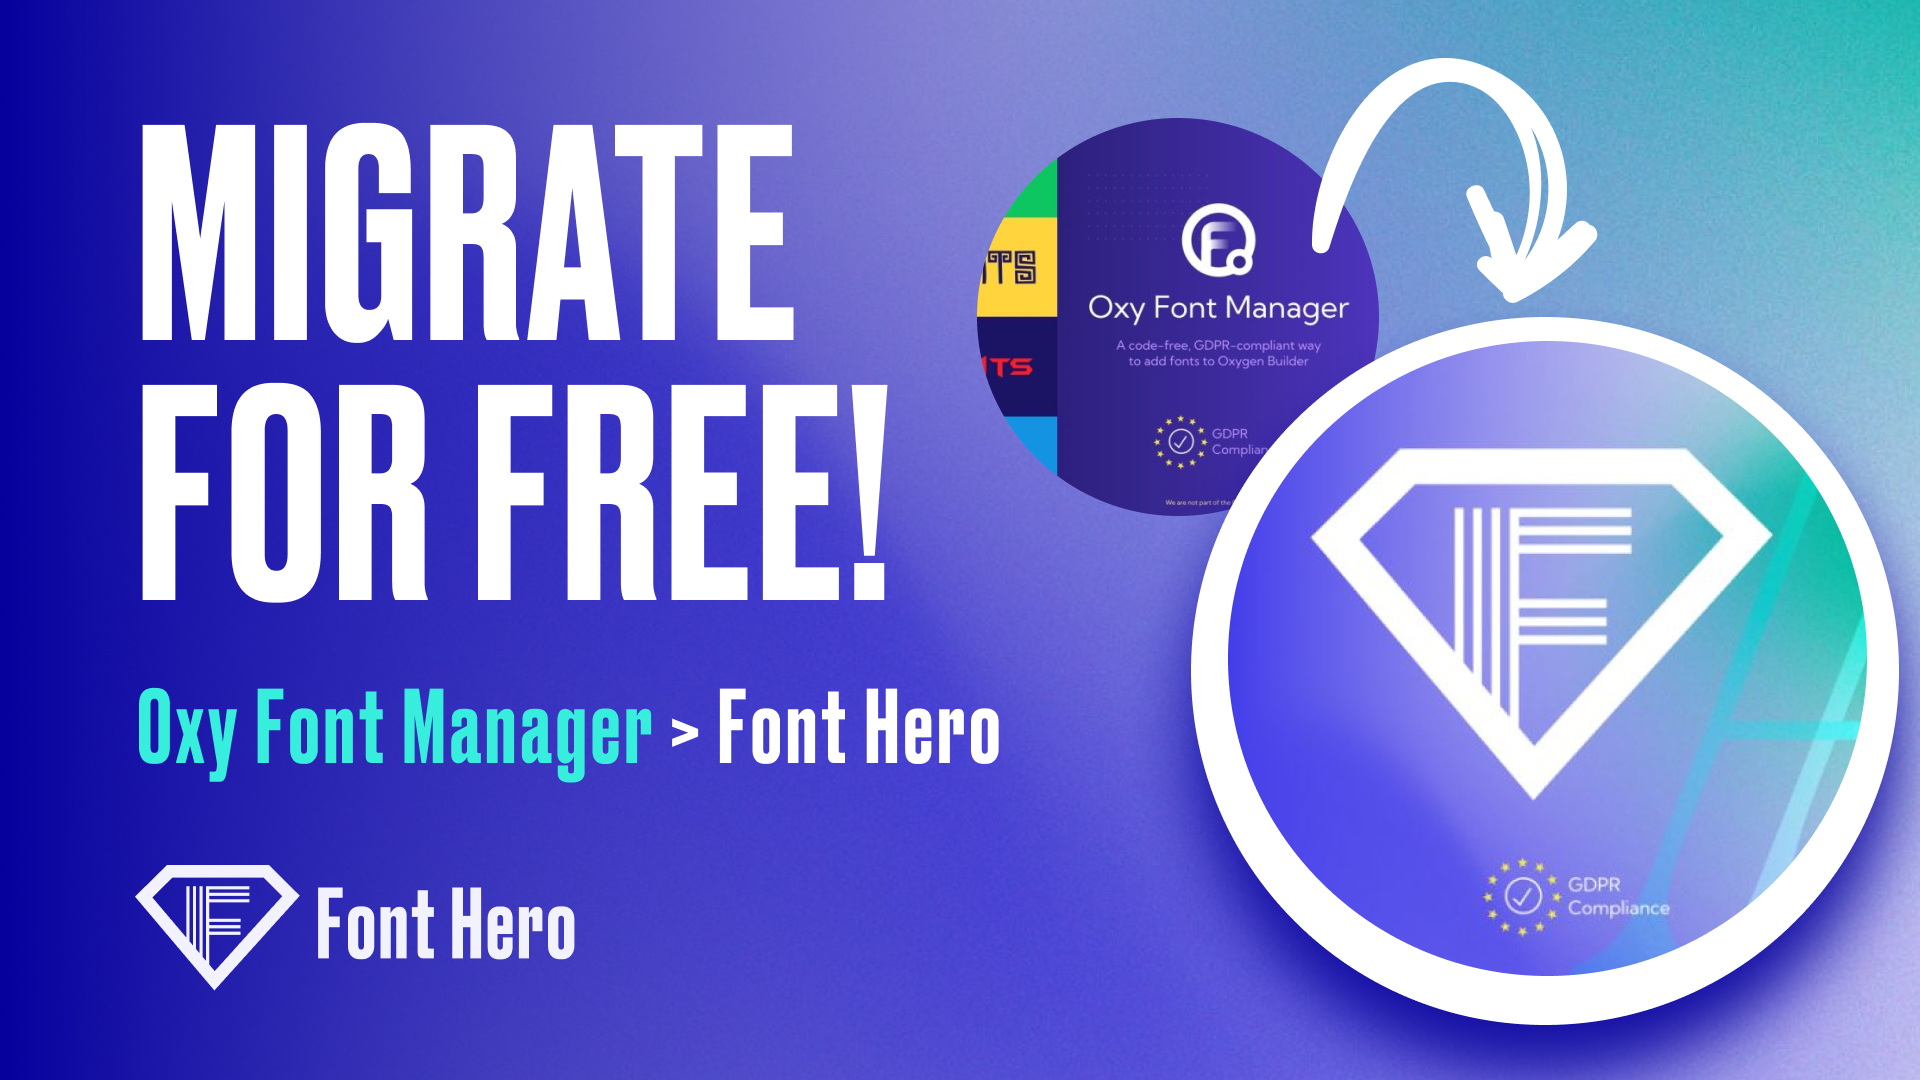 Free Migration from Oxy Font Manager to Font Hero